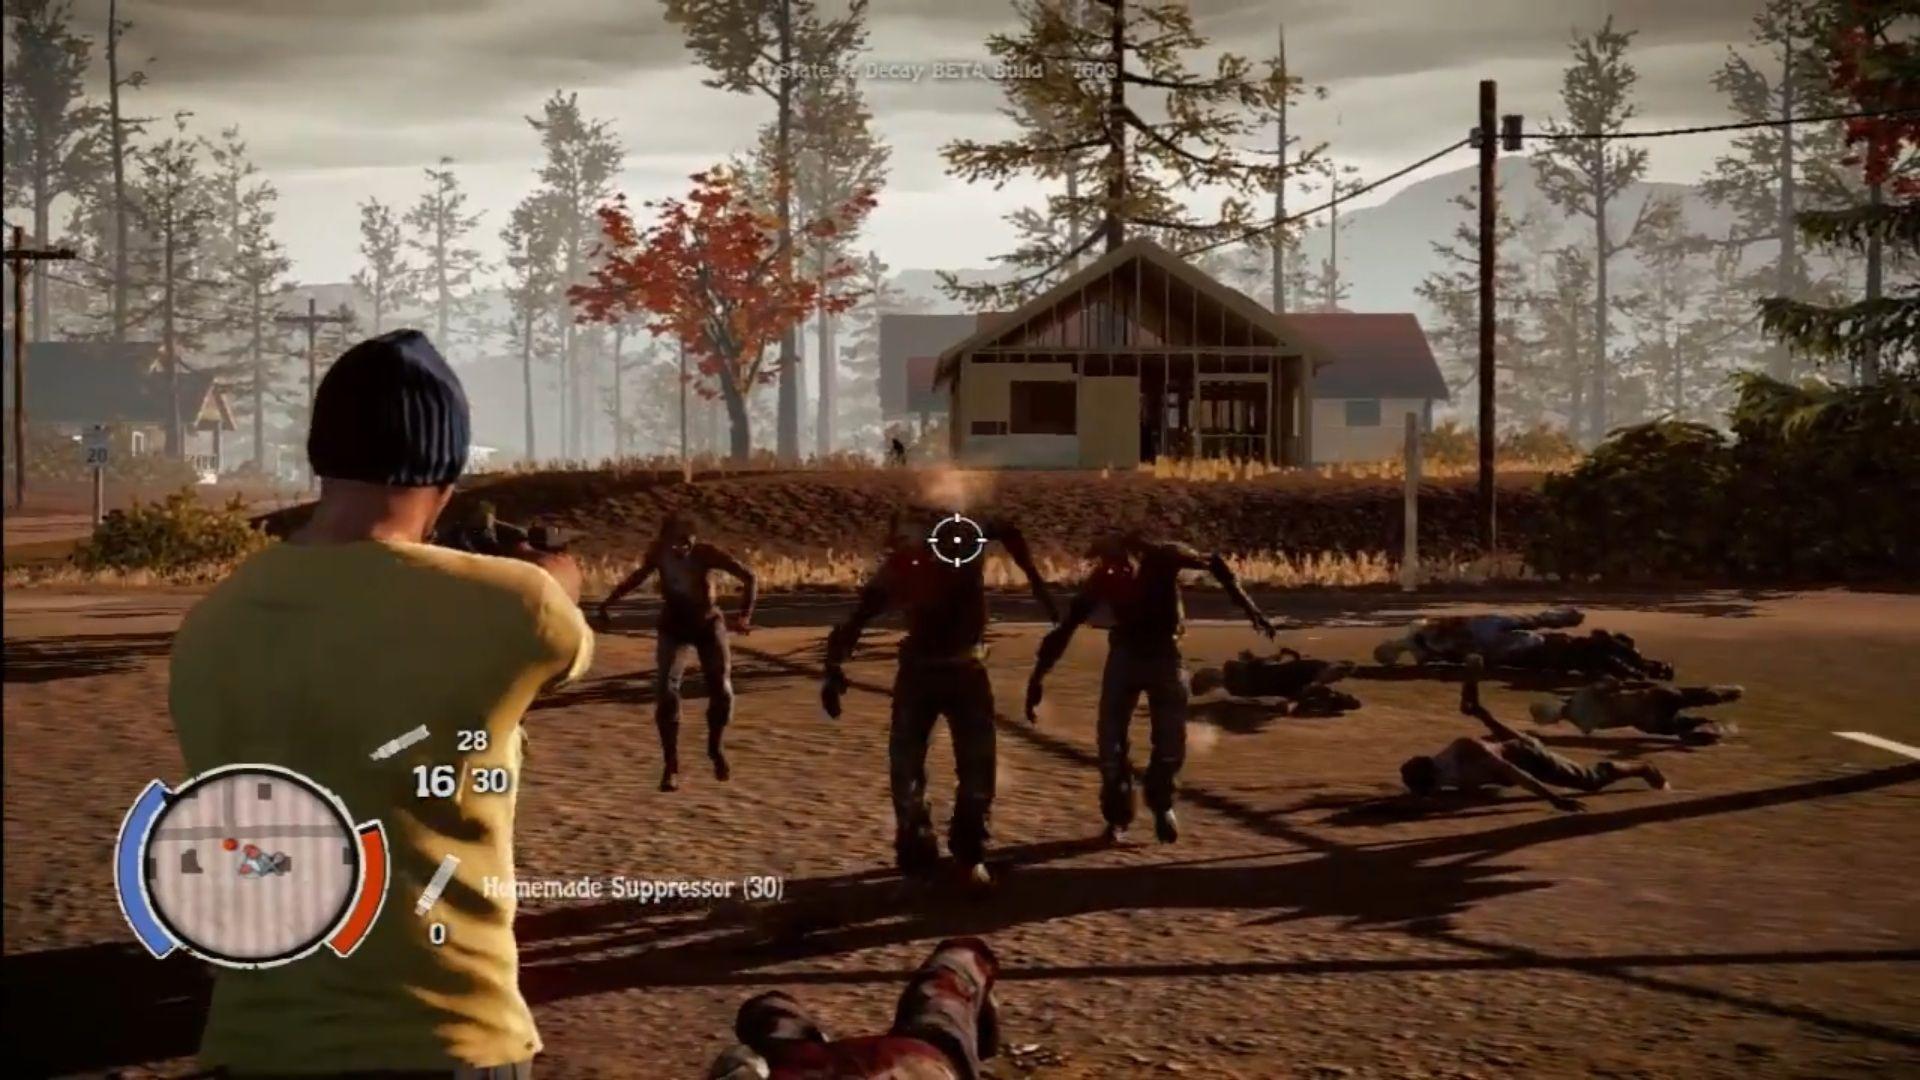 State of Decay Officially Coming June 2013. Den of Geek